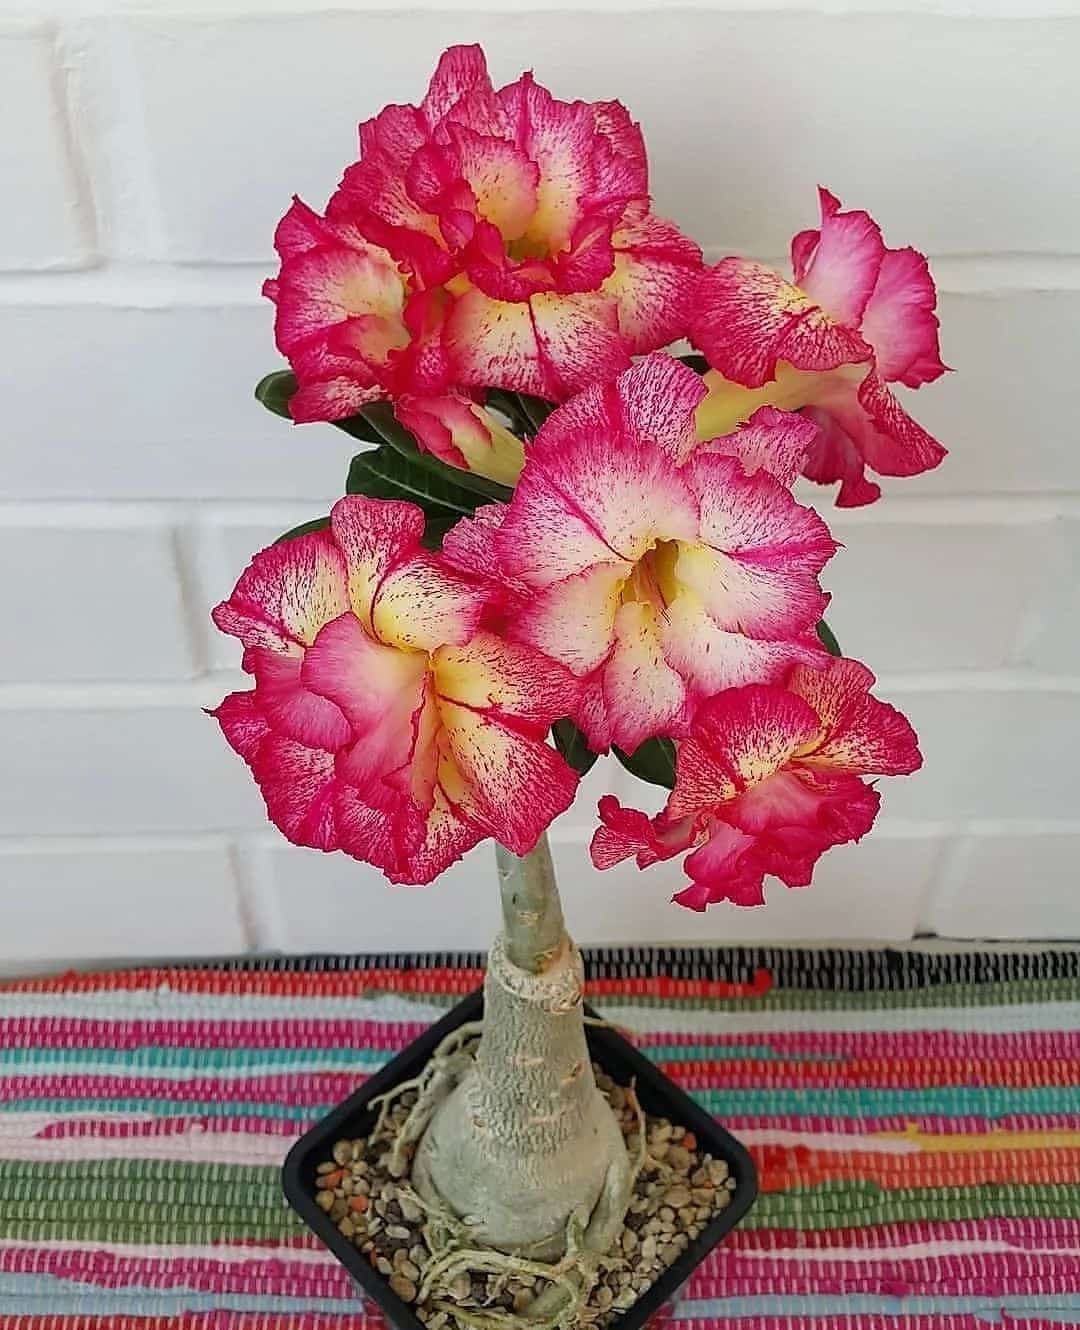 Desert Rose: A Unique And Beautiful Natural Wonder